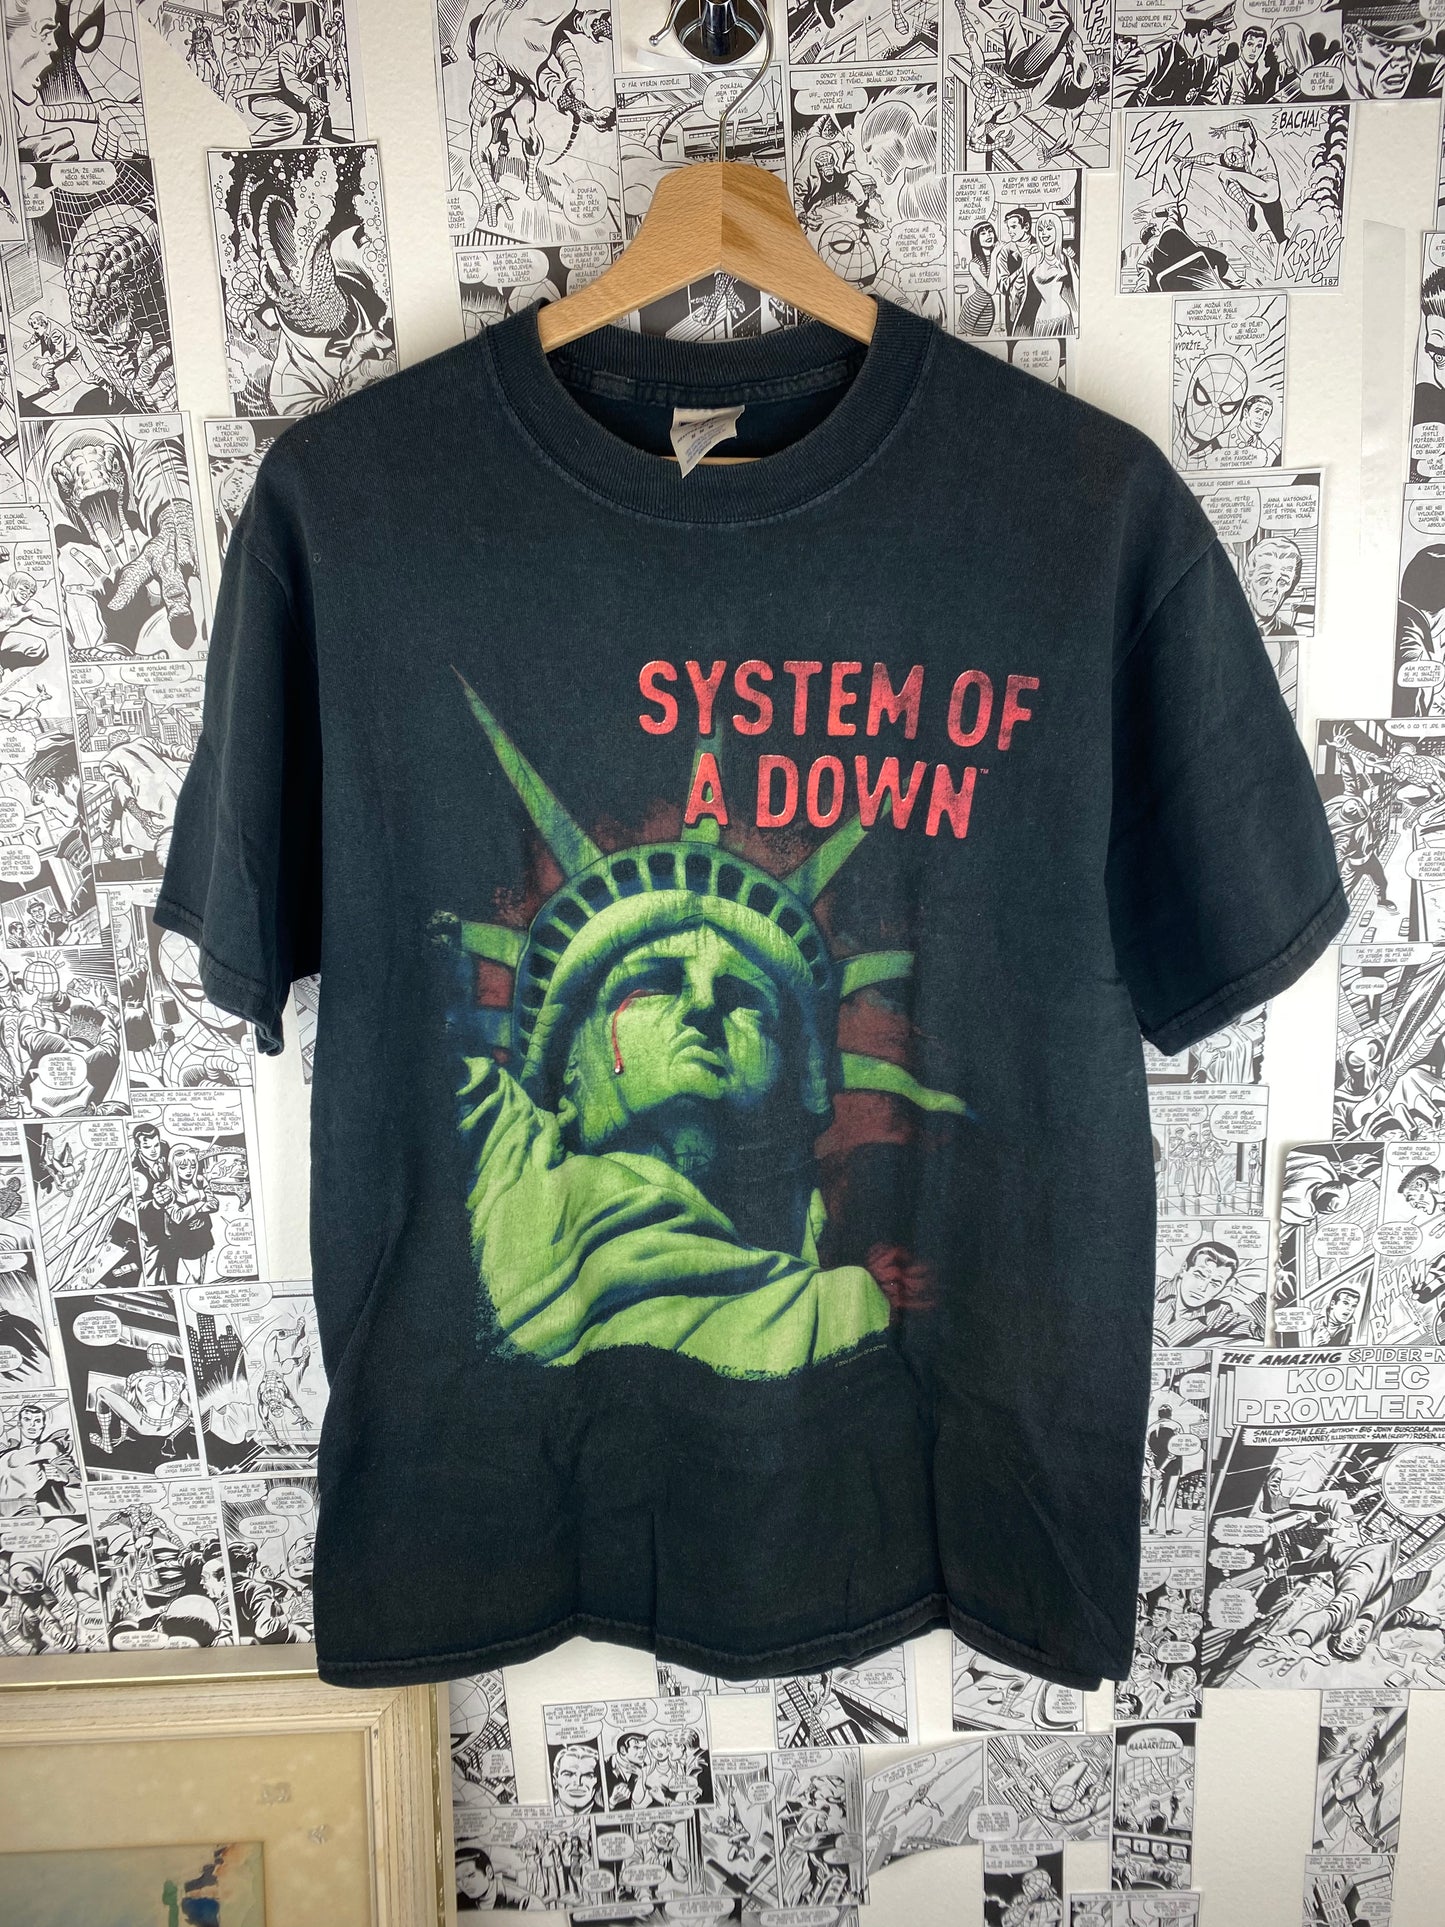 Vintage System of a Down - 2004 - t-shirt - size M